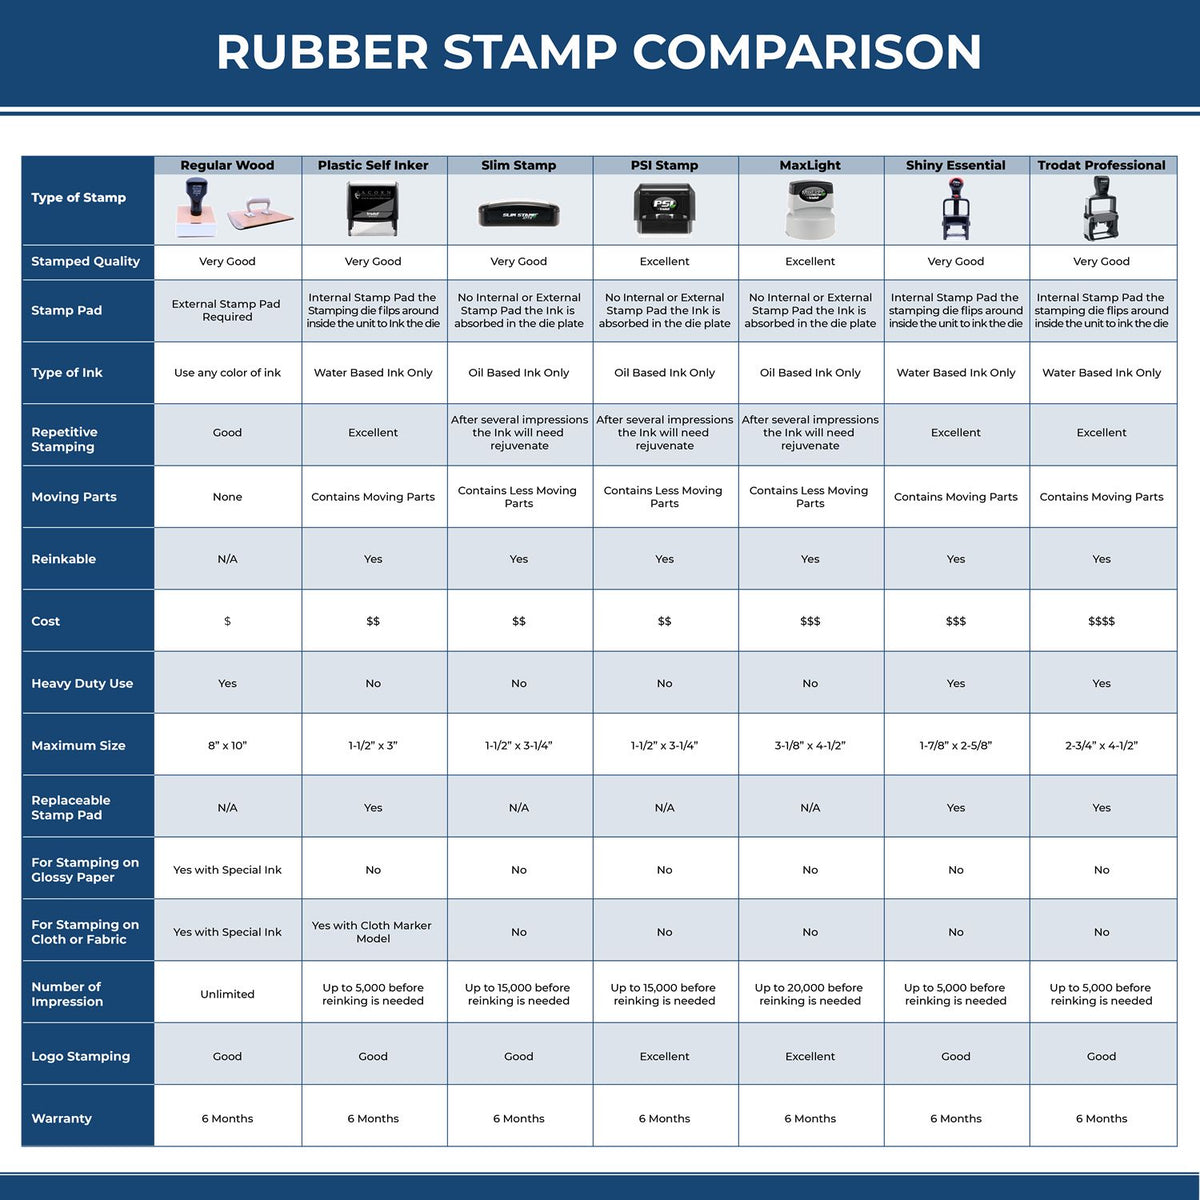 Jumbo Large Red First Class Mail Xstamper Stamp 5111 Rubber Stamp Comparison